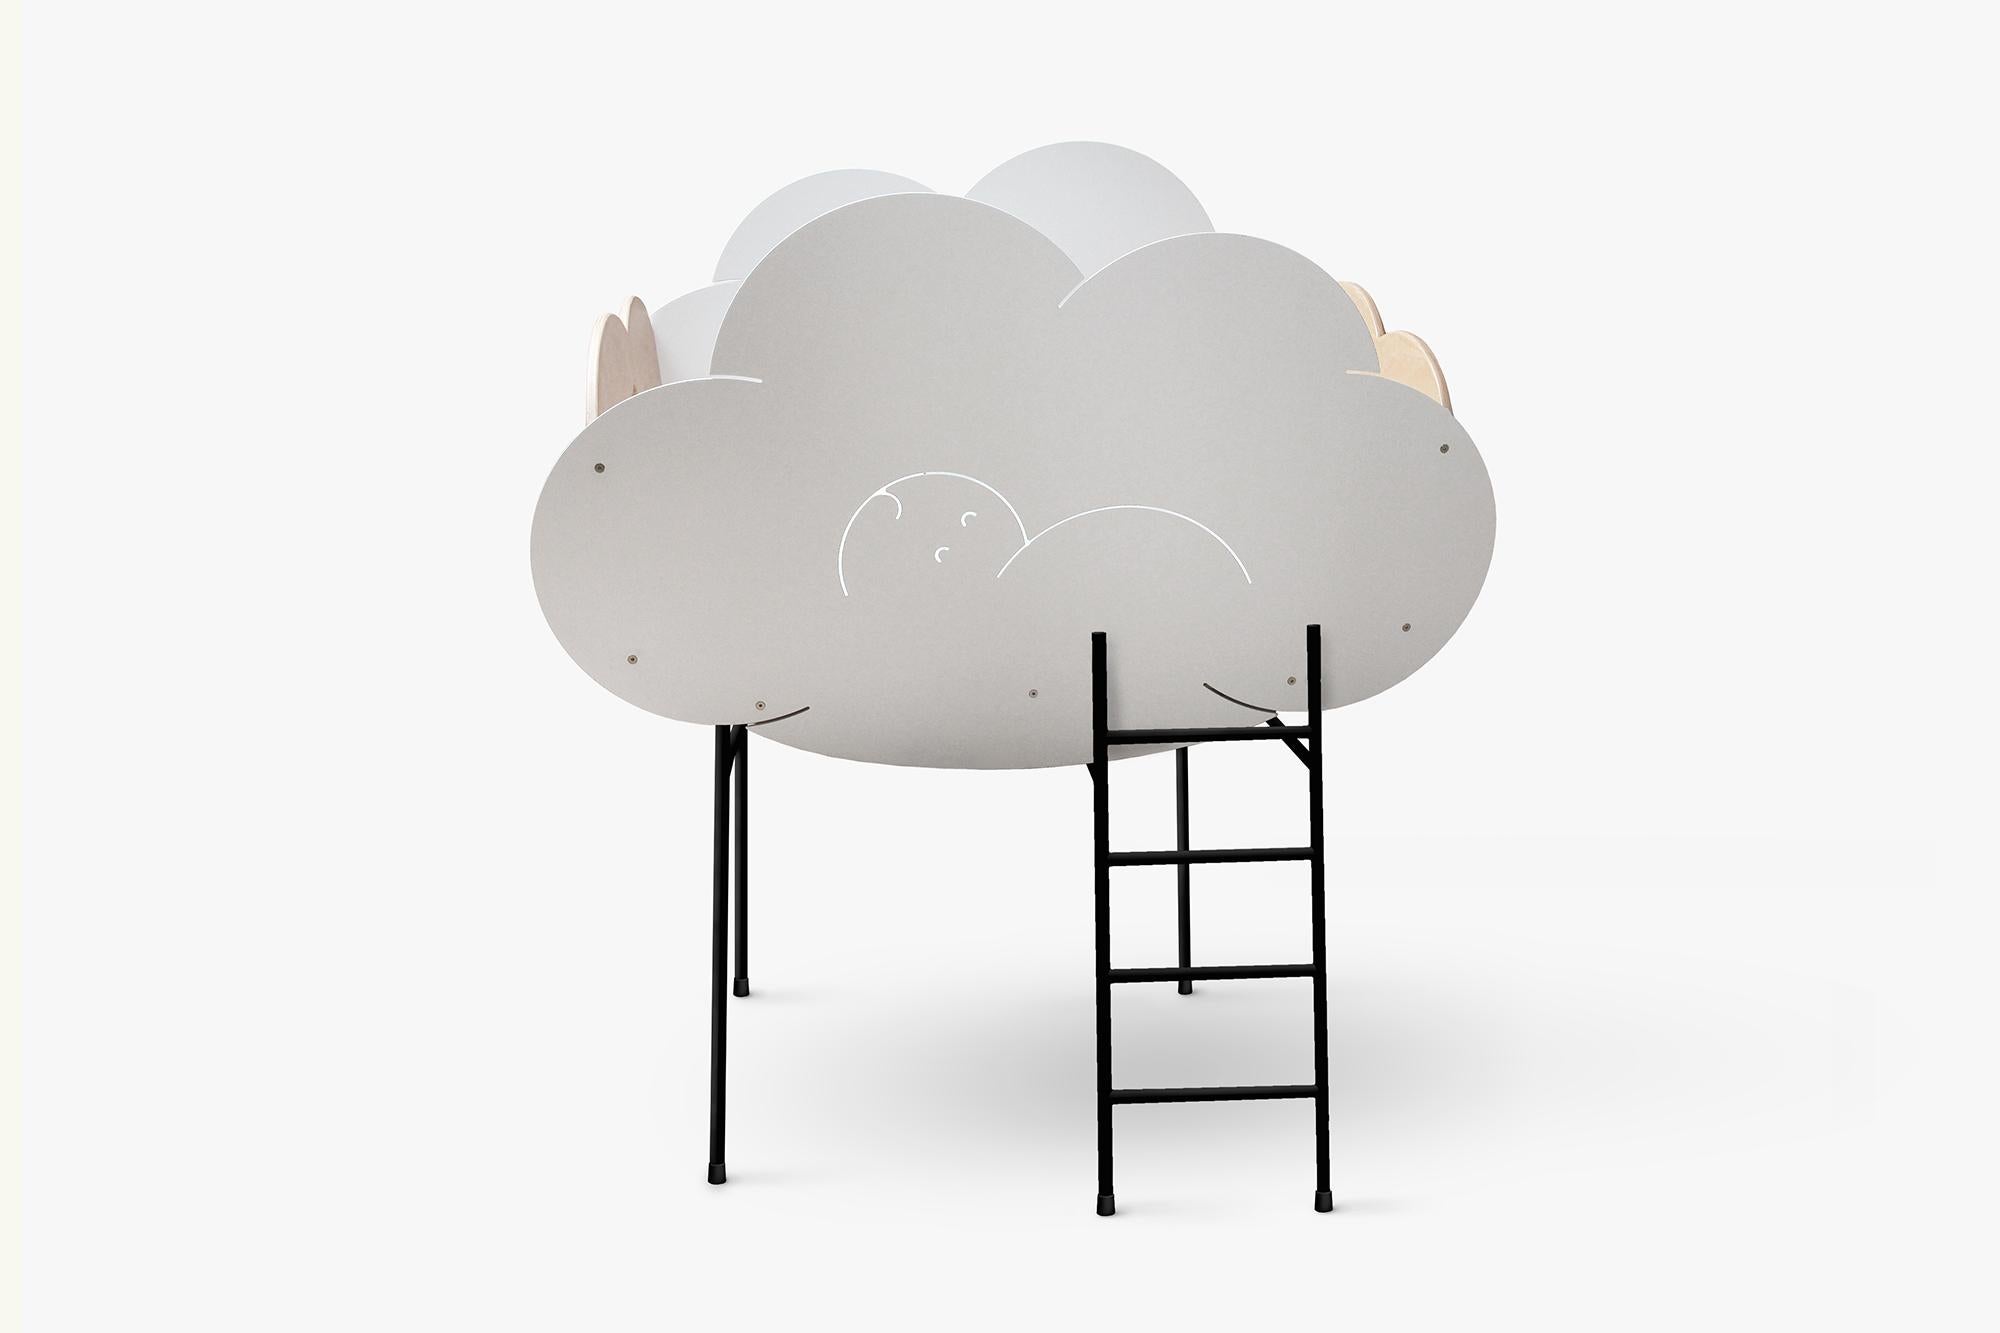 A nice little cloud to cradle the baby during his first dreams.
When it is resting on the floor it rocks back and forth favouring the child's movements.
It becomes a box for games when the child grows up.
The sides are in aluminum while the